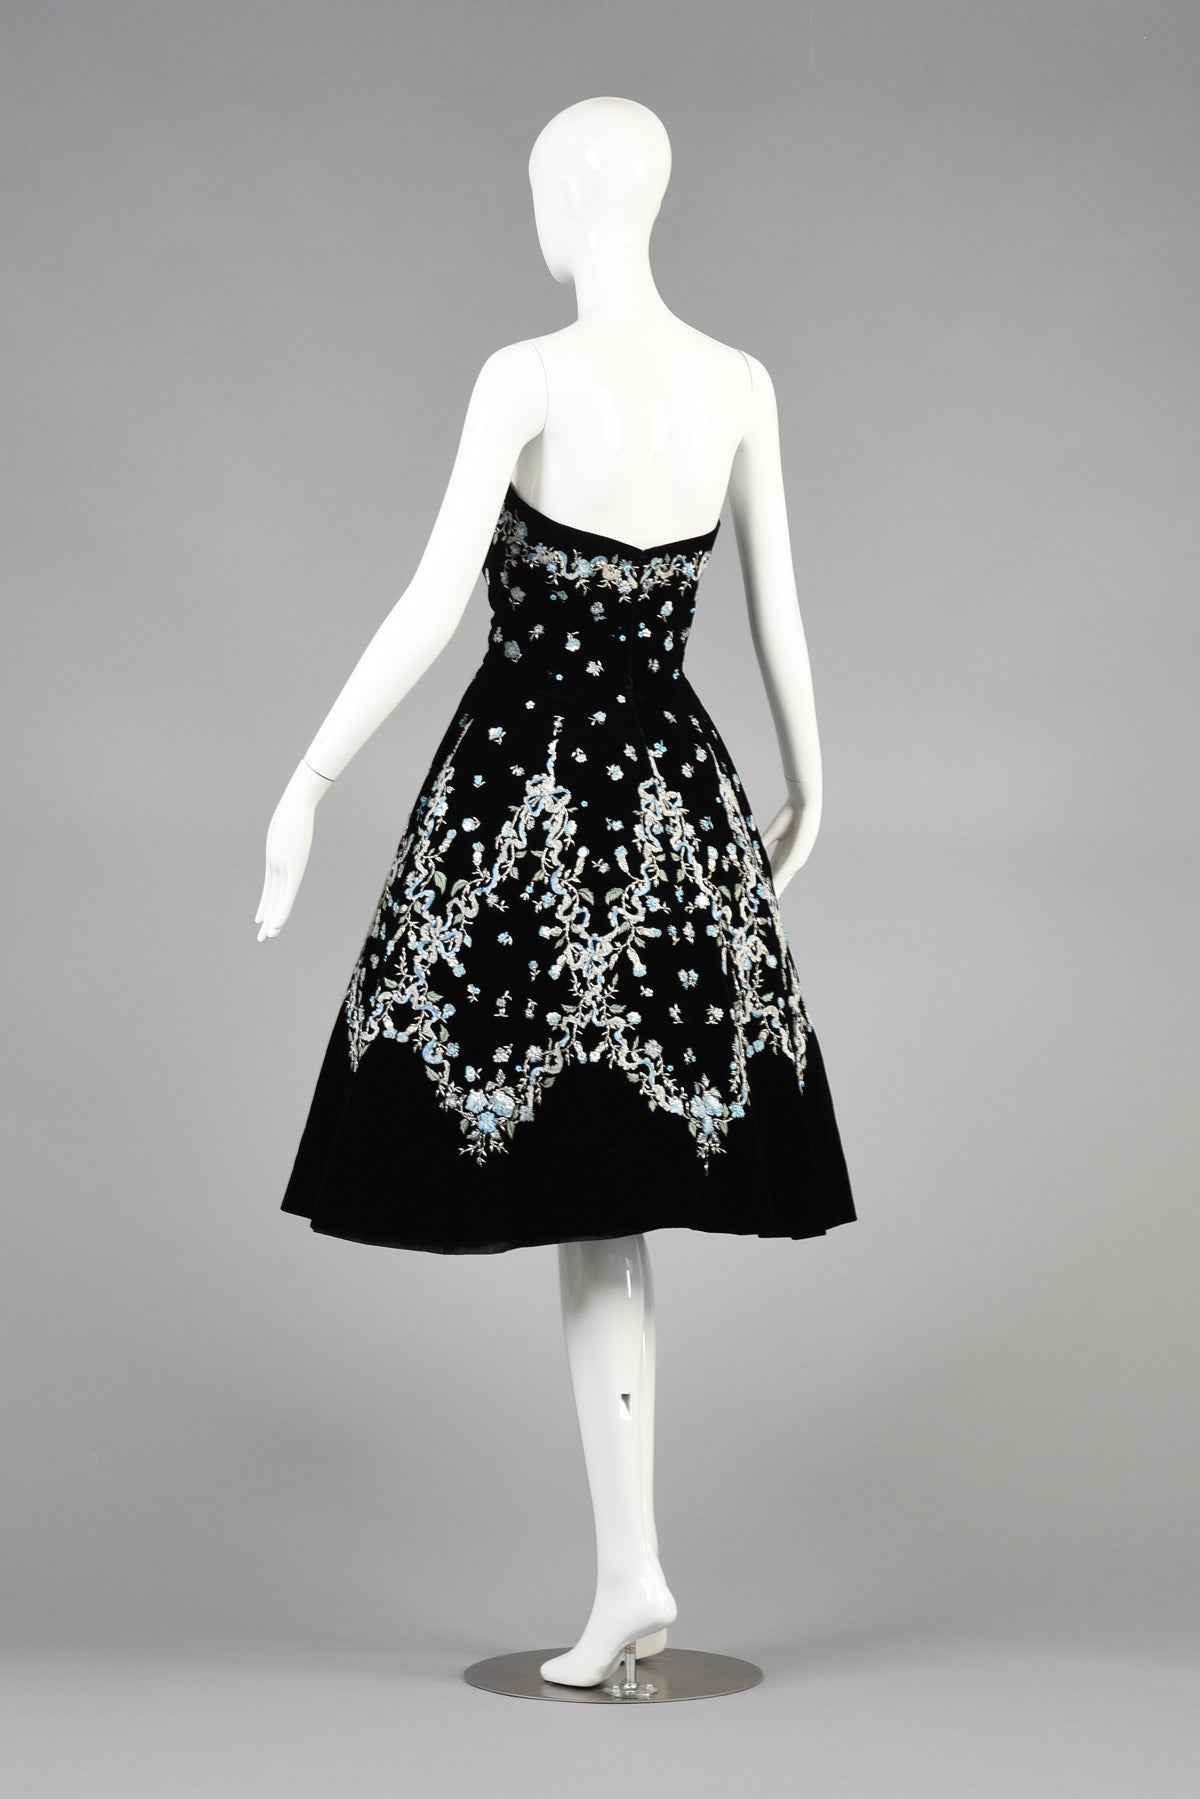 Women's 1957 Pierre Balmain Haute Couture Cocktail Dress with Lesage Embroidery For Sale